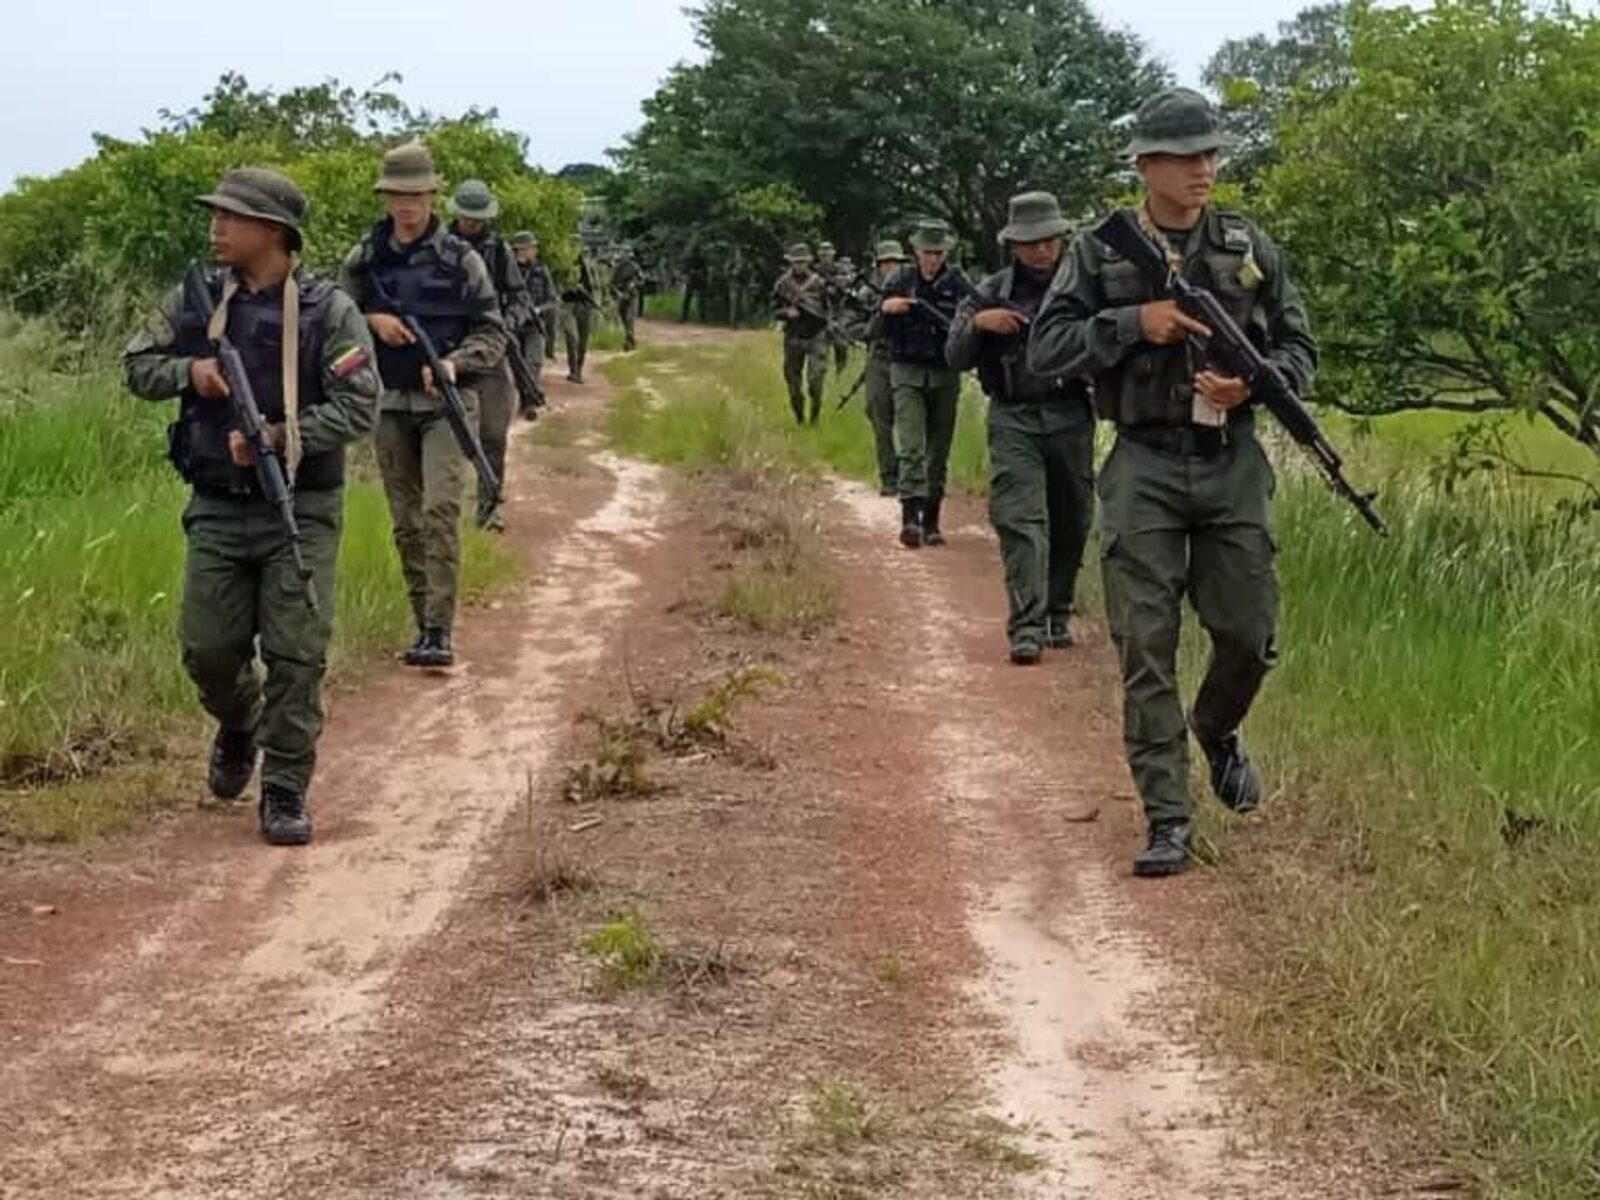 Venezuela begins operations with Special Forces along the border with Brazil and Guyana